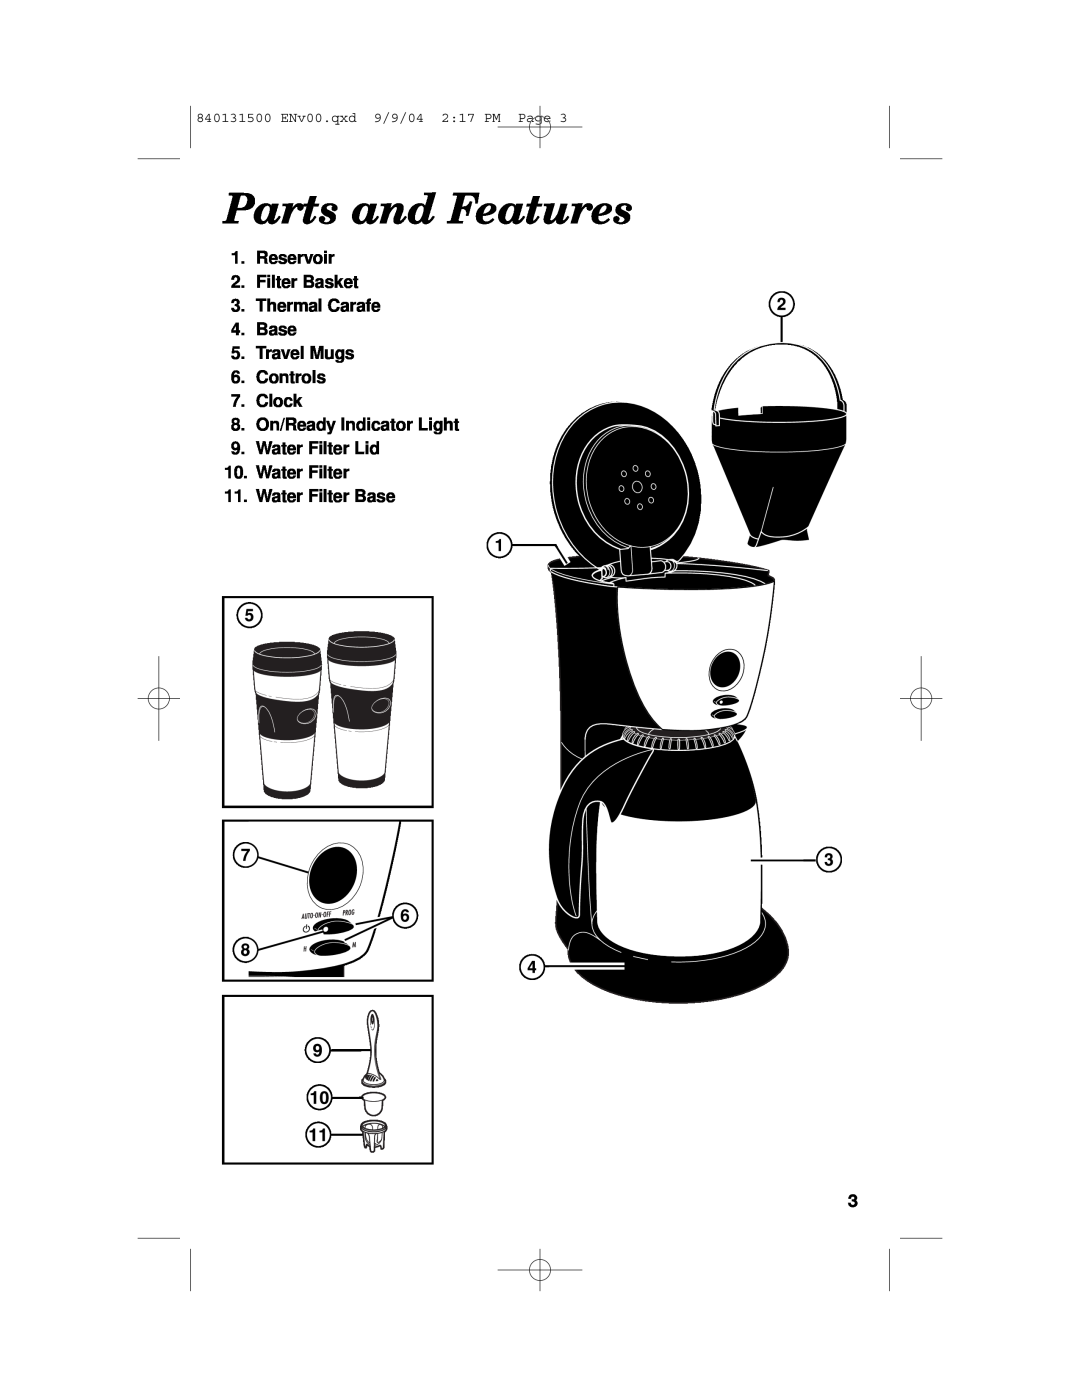 Hamilton Beach Stay or Go Coffeemaker manual Parts and Features, Reservoir 2. Filter Basket 3. Thermal Carafe 4. Base 